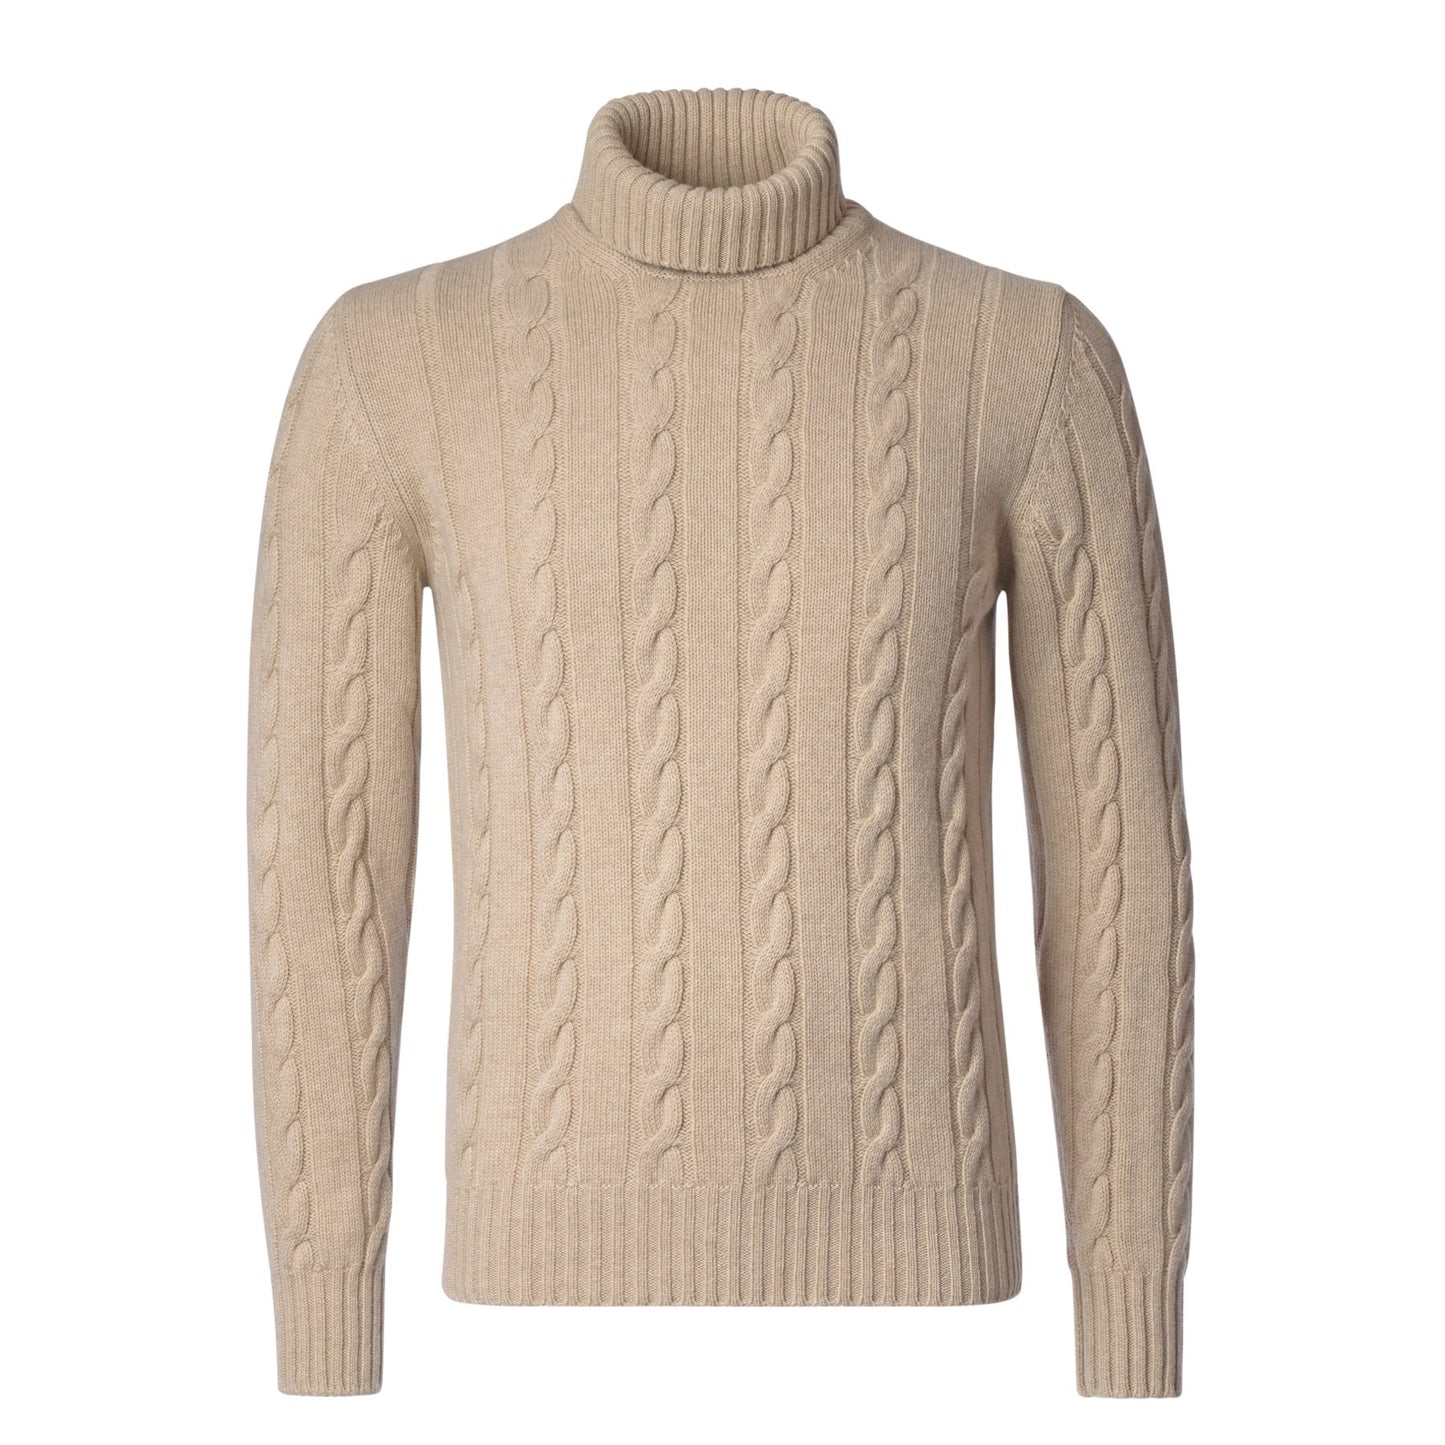 Luciano Barbera Turtleneck Cable-Knit Wool, Silk and Cashmere-Blend Sweater in Beige - SARTALE